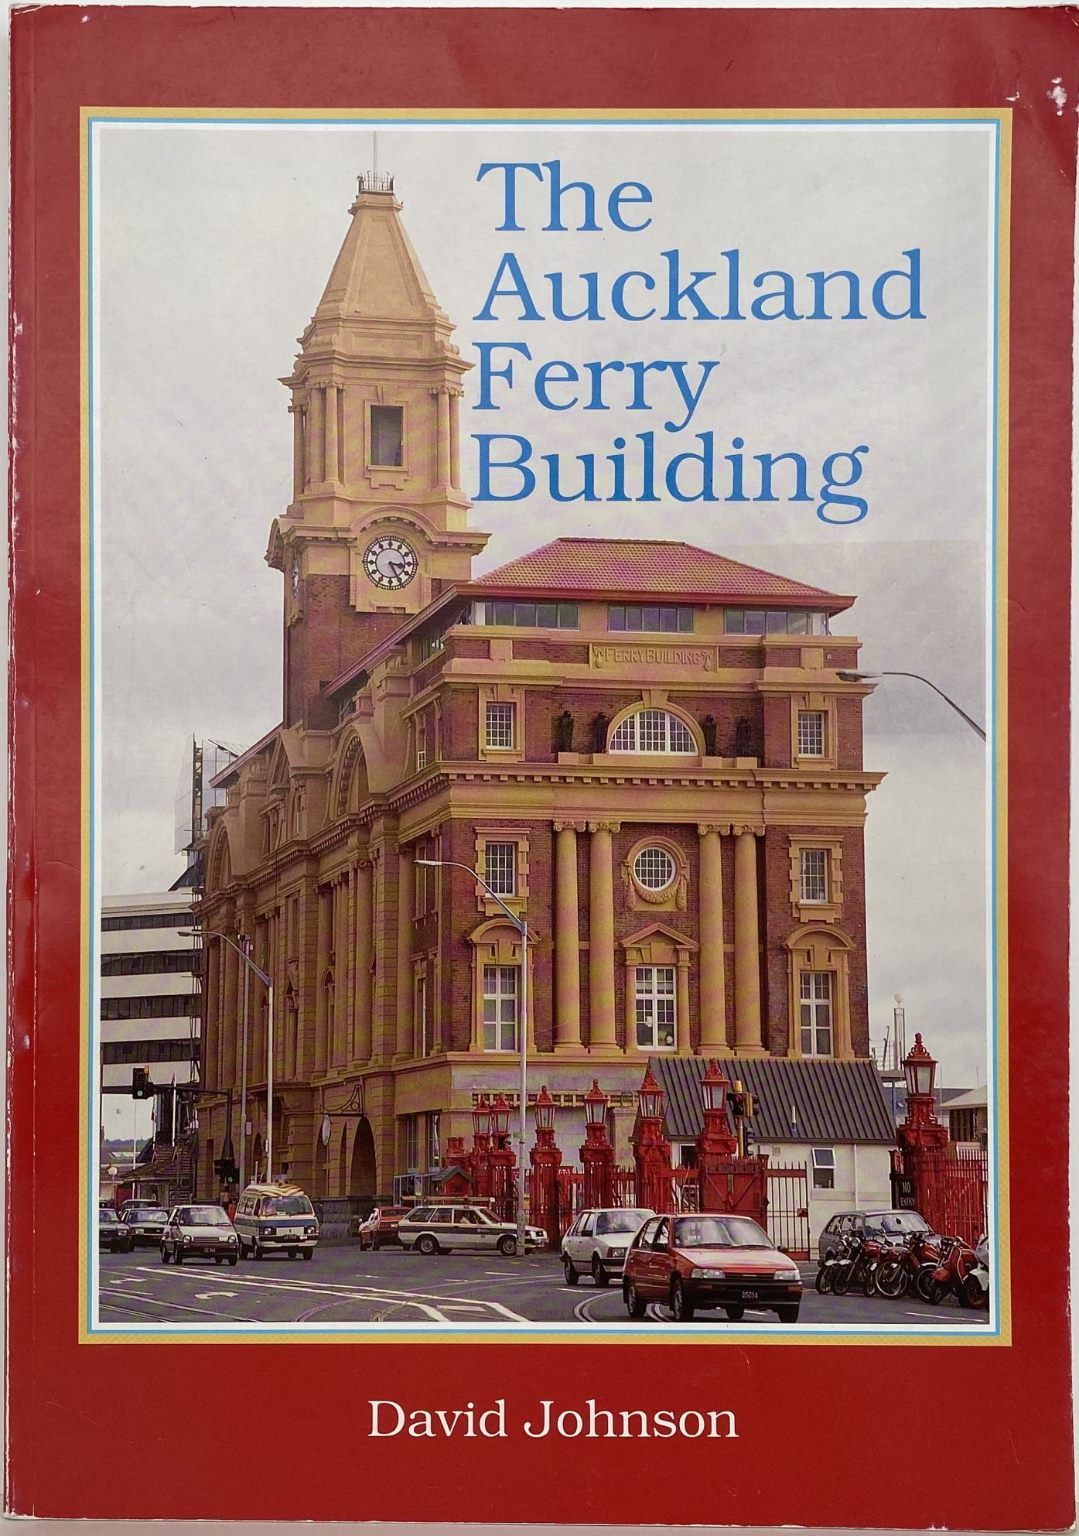 THE AUCKLAND FERRY BUILDING